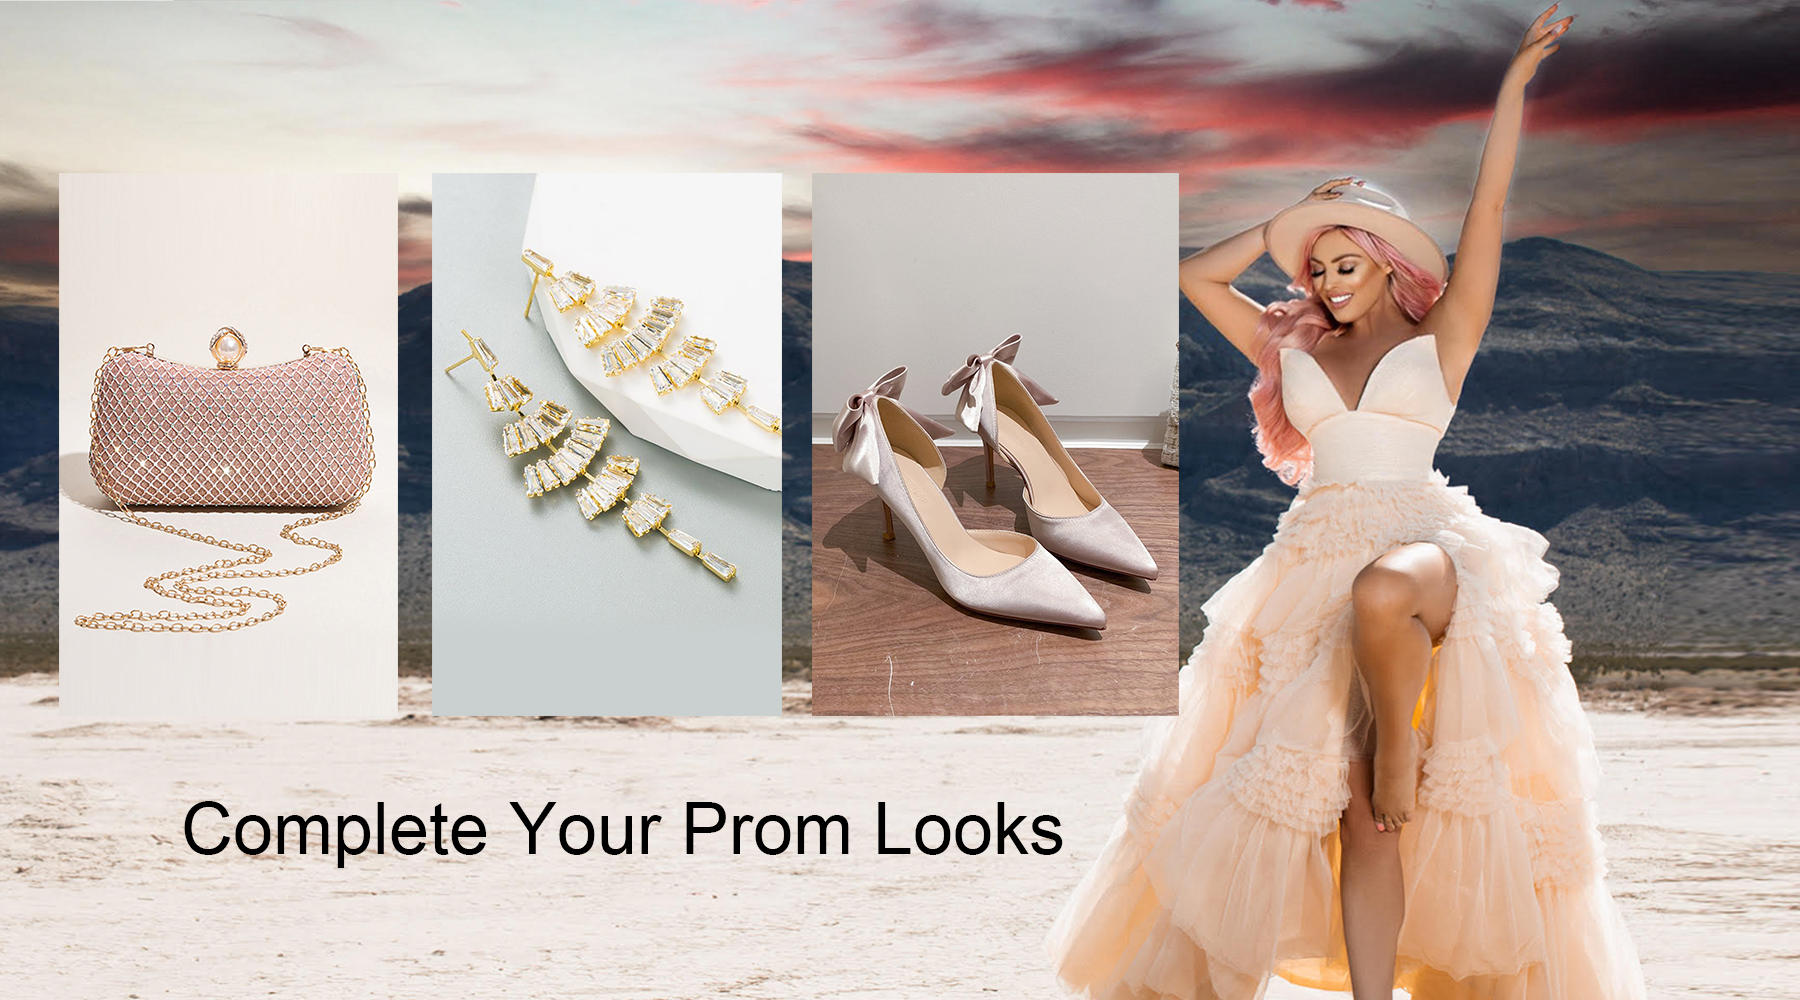 Complete Your Prom Look: The Perfect Accessories to Match Your Prom Dress